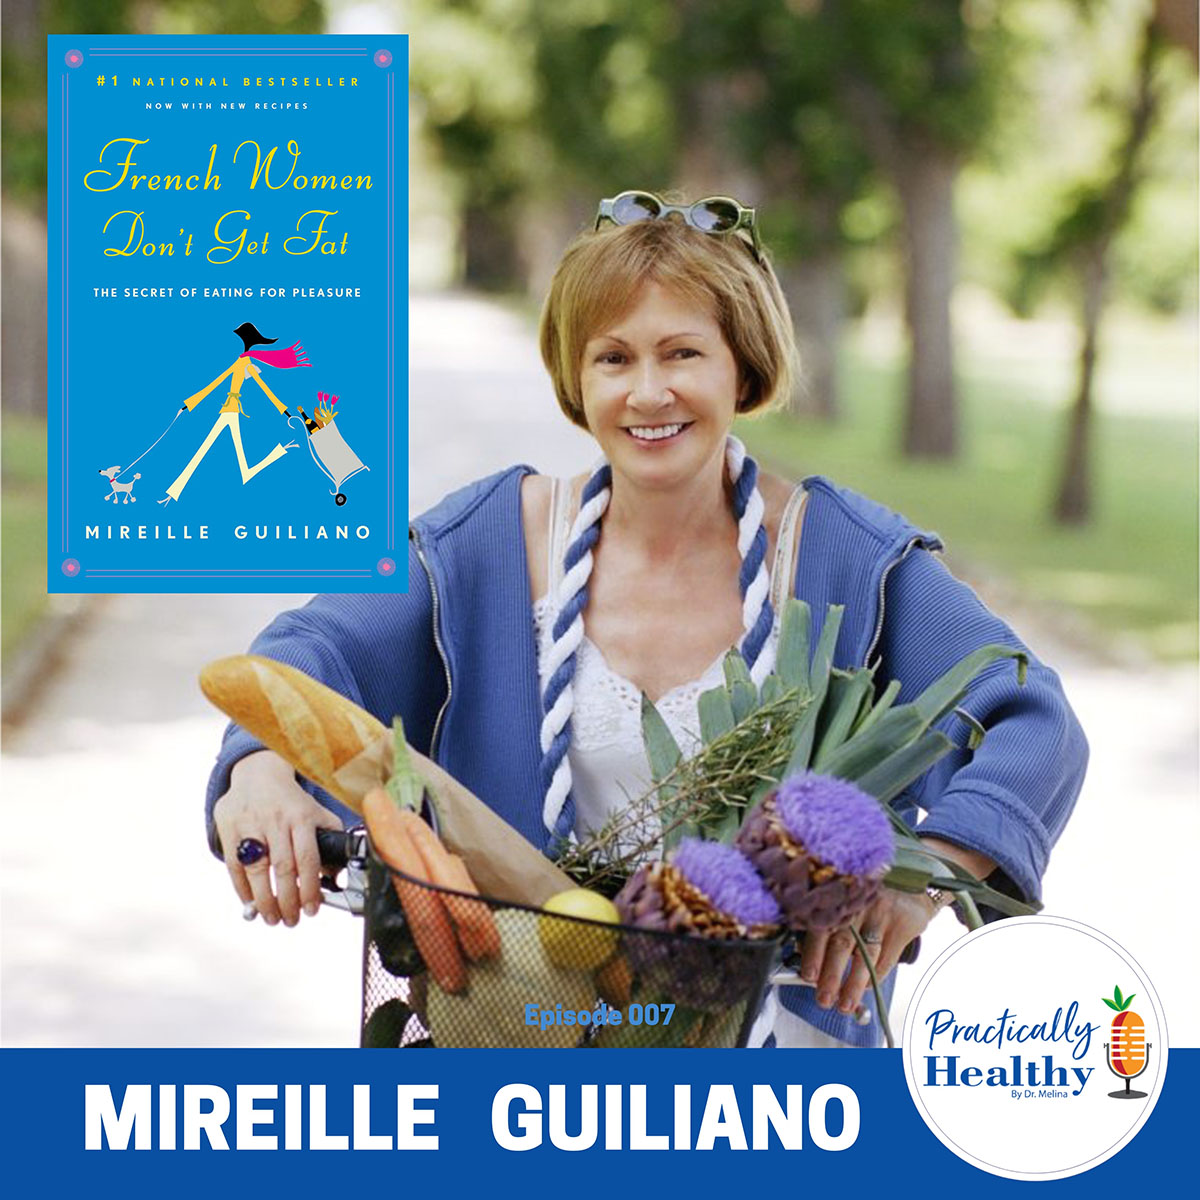 Food, Friends, Curiosity: Mireille Guiliano Practically Healthy by Dr. Melina